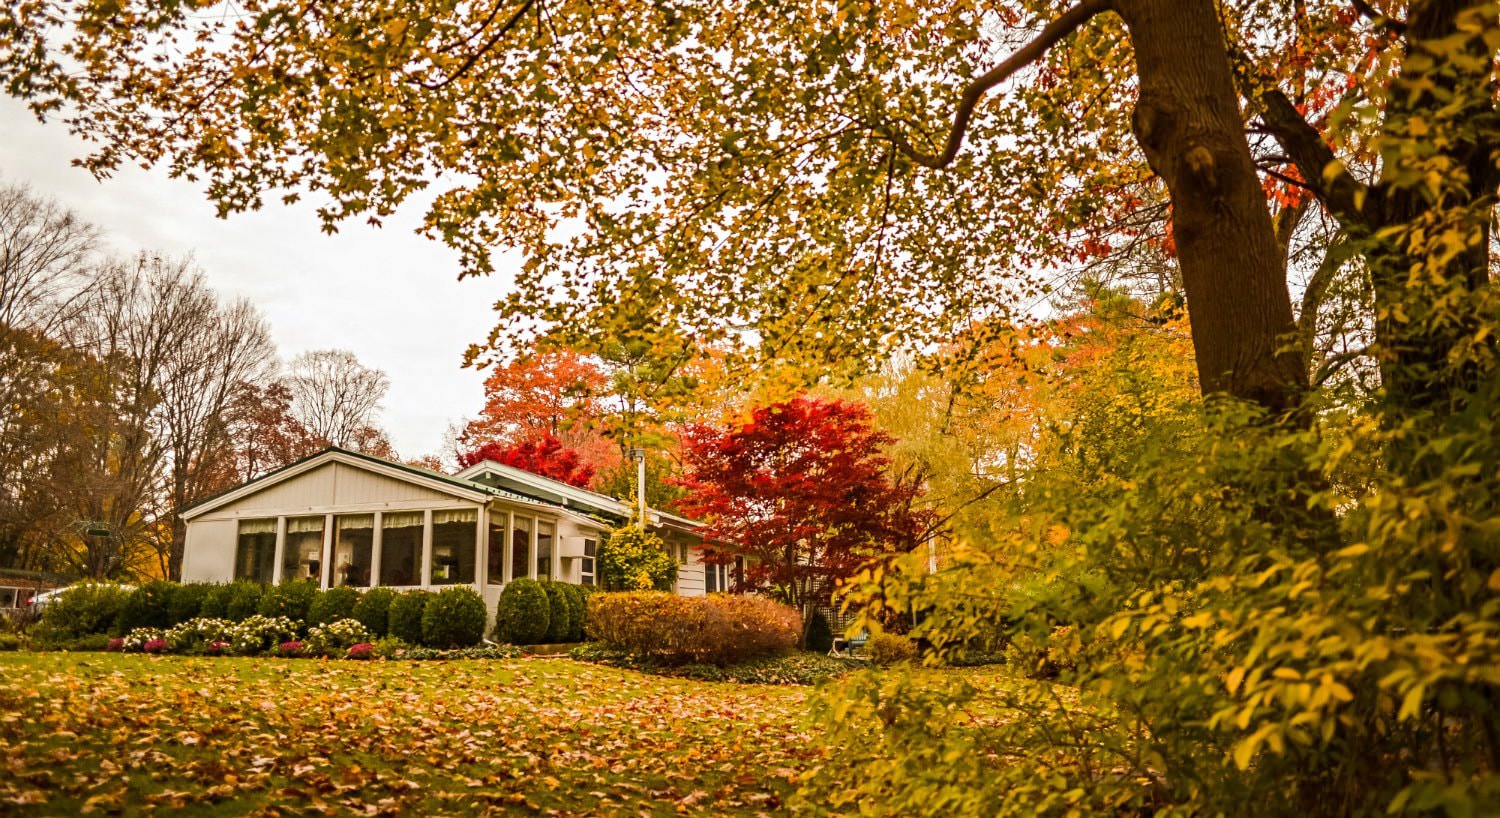 White cottage surrounded by trees with red, orange, and green leaves, and grass topped with fallen leaves